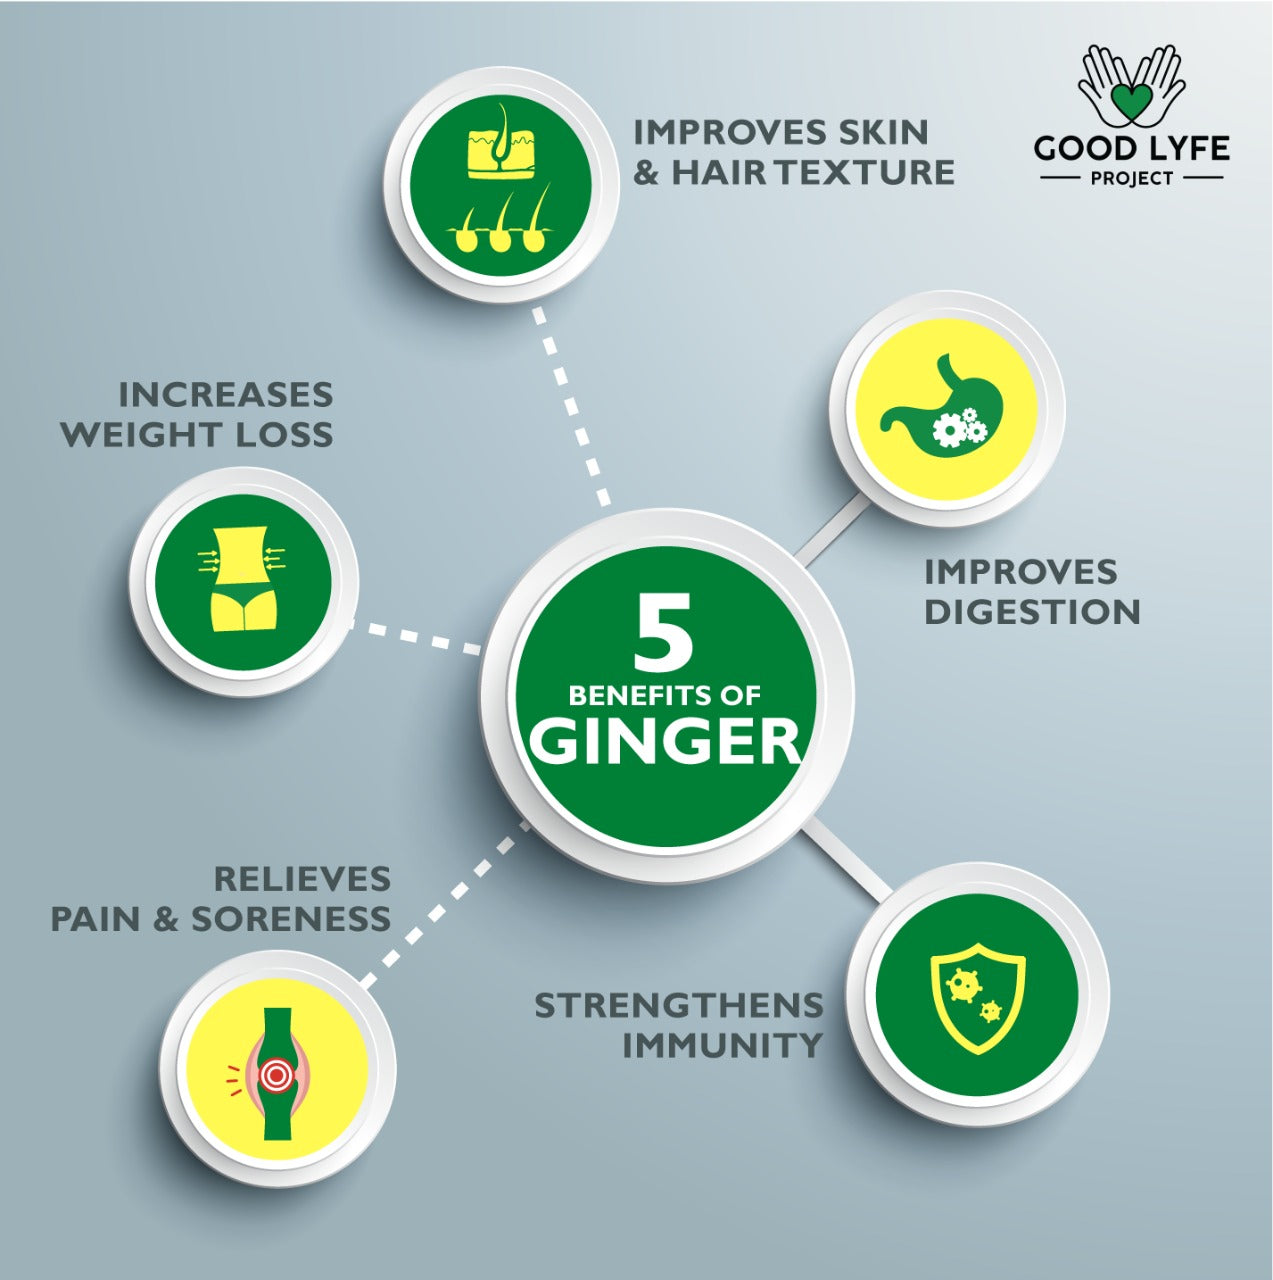 Buy Online Karbianglong Ginger Powder Certified Organic India Made USDA Products benefits Card  Good Lyfe Project